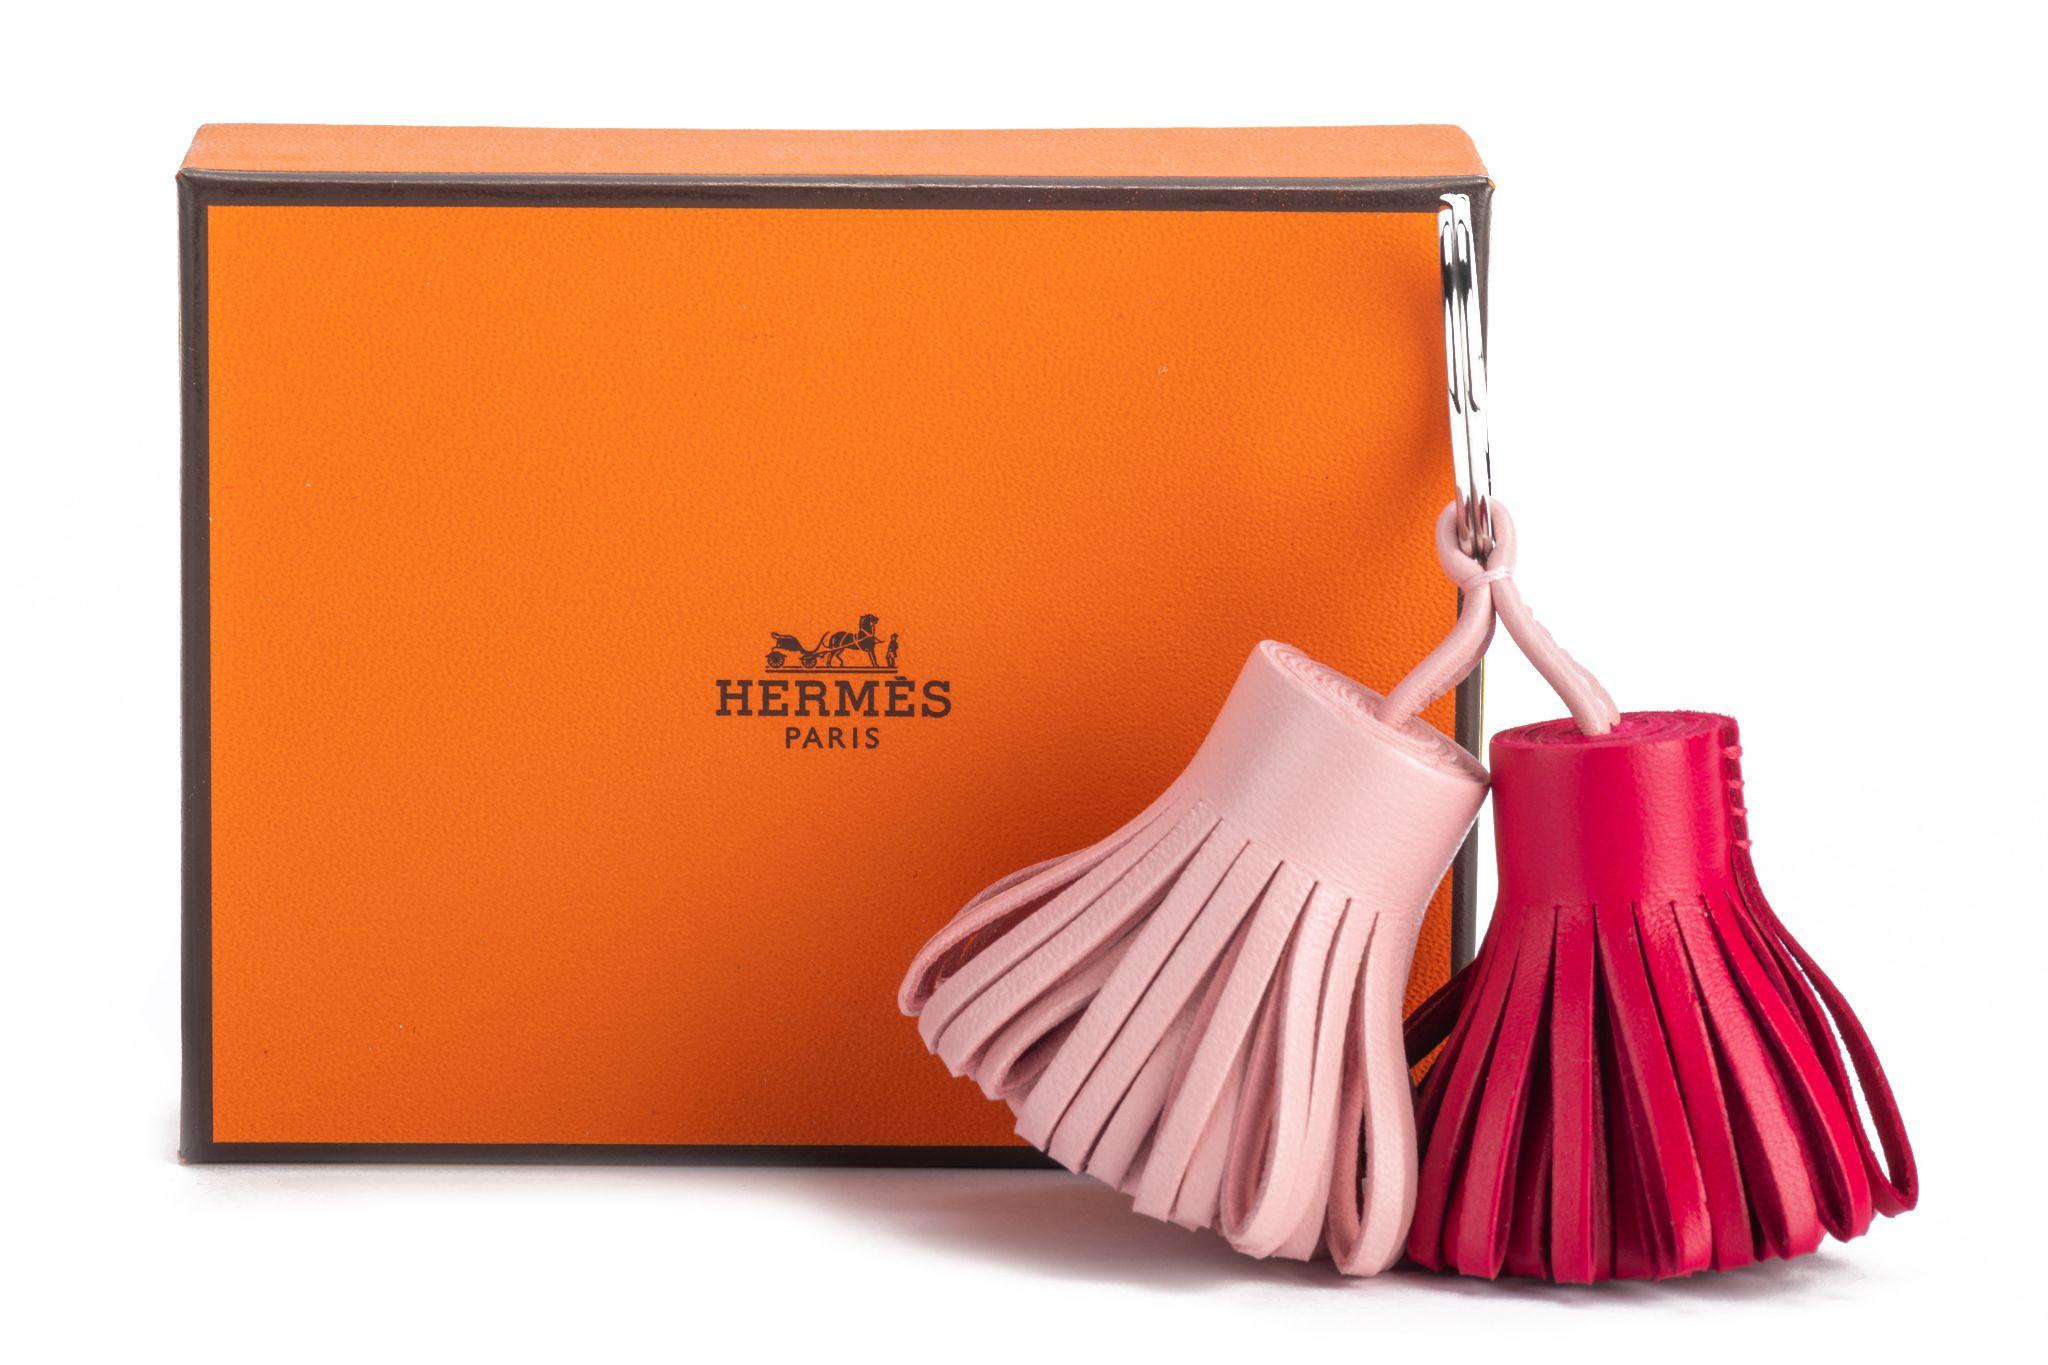 Hermes fuchsia and pink leather double Carmen tassel keychain. Palladium metal Brand new with original box and ribbon